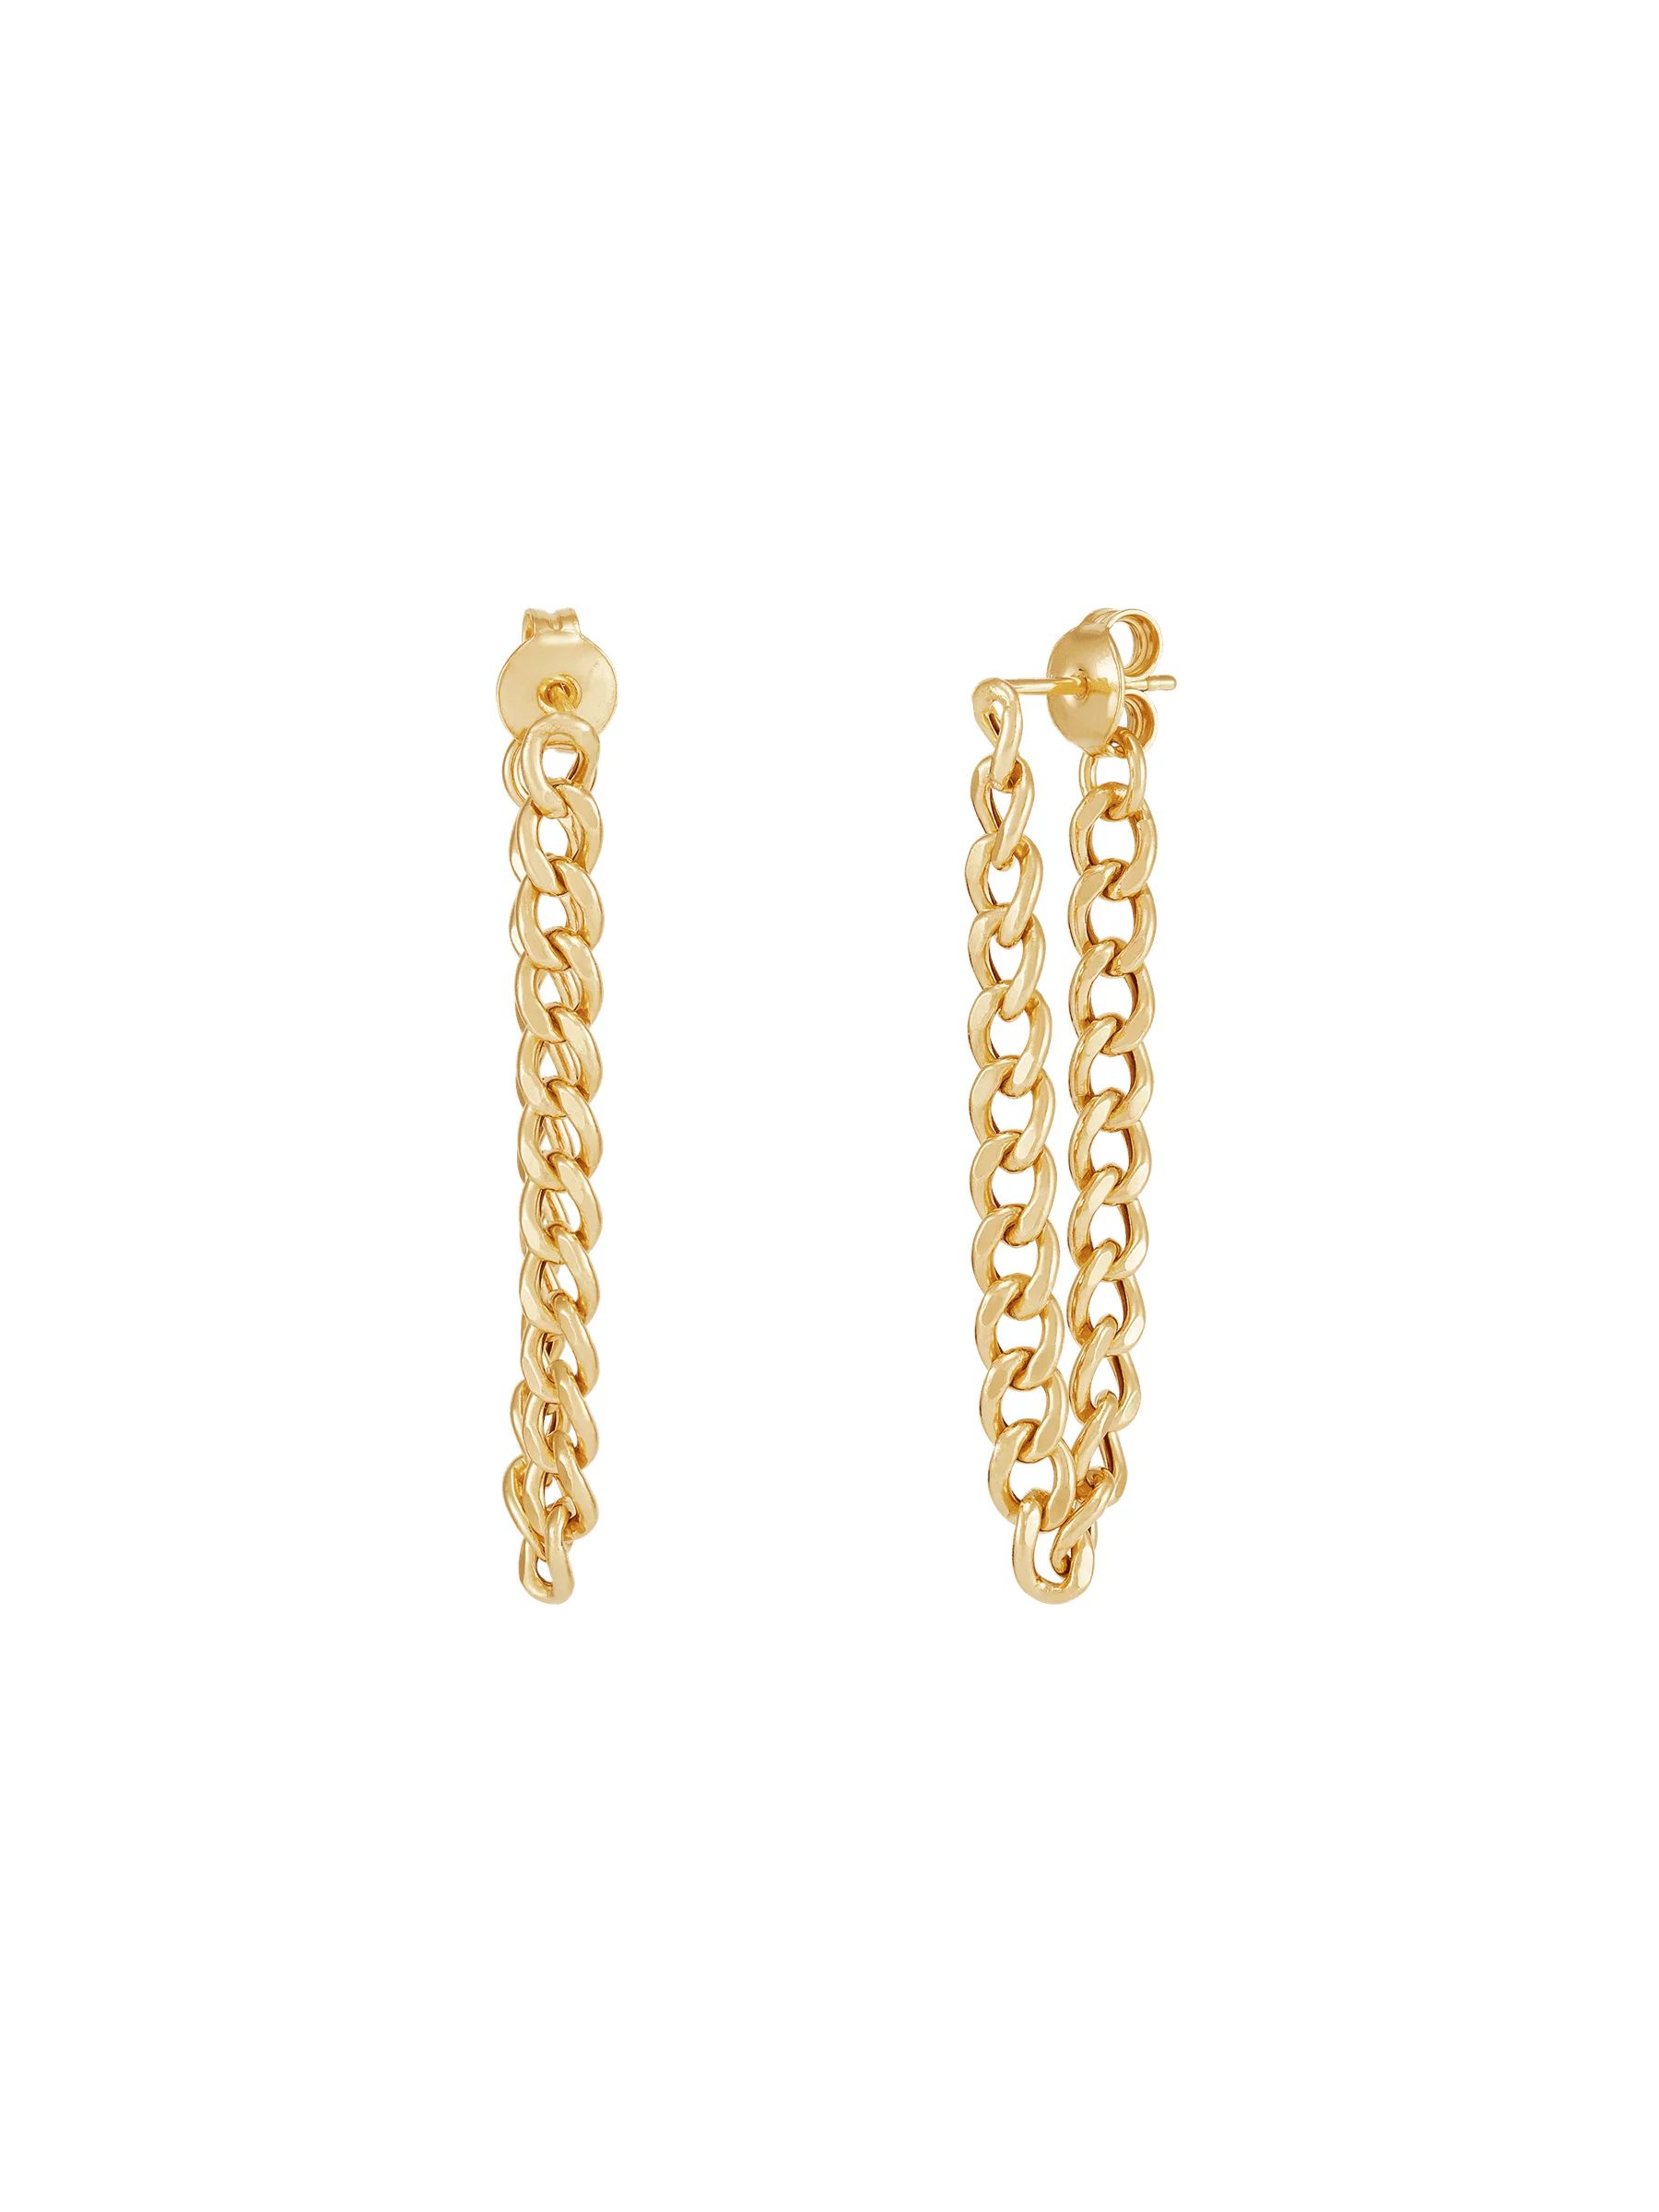 Women's Welry Front and Back 3.7mm Curb Chain Earrings in 14kt Gold-Plated Sterling Silver | Walmart (US)